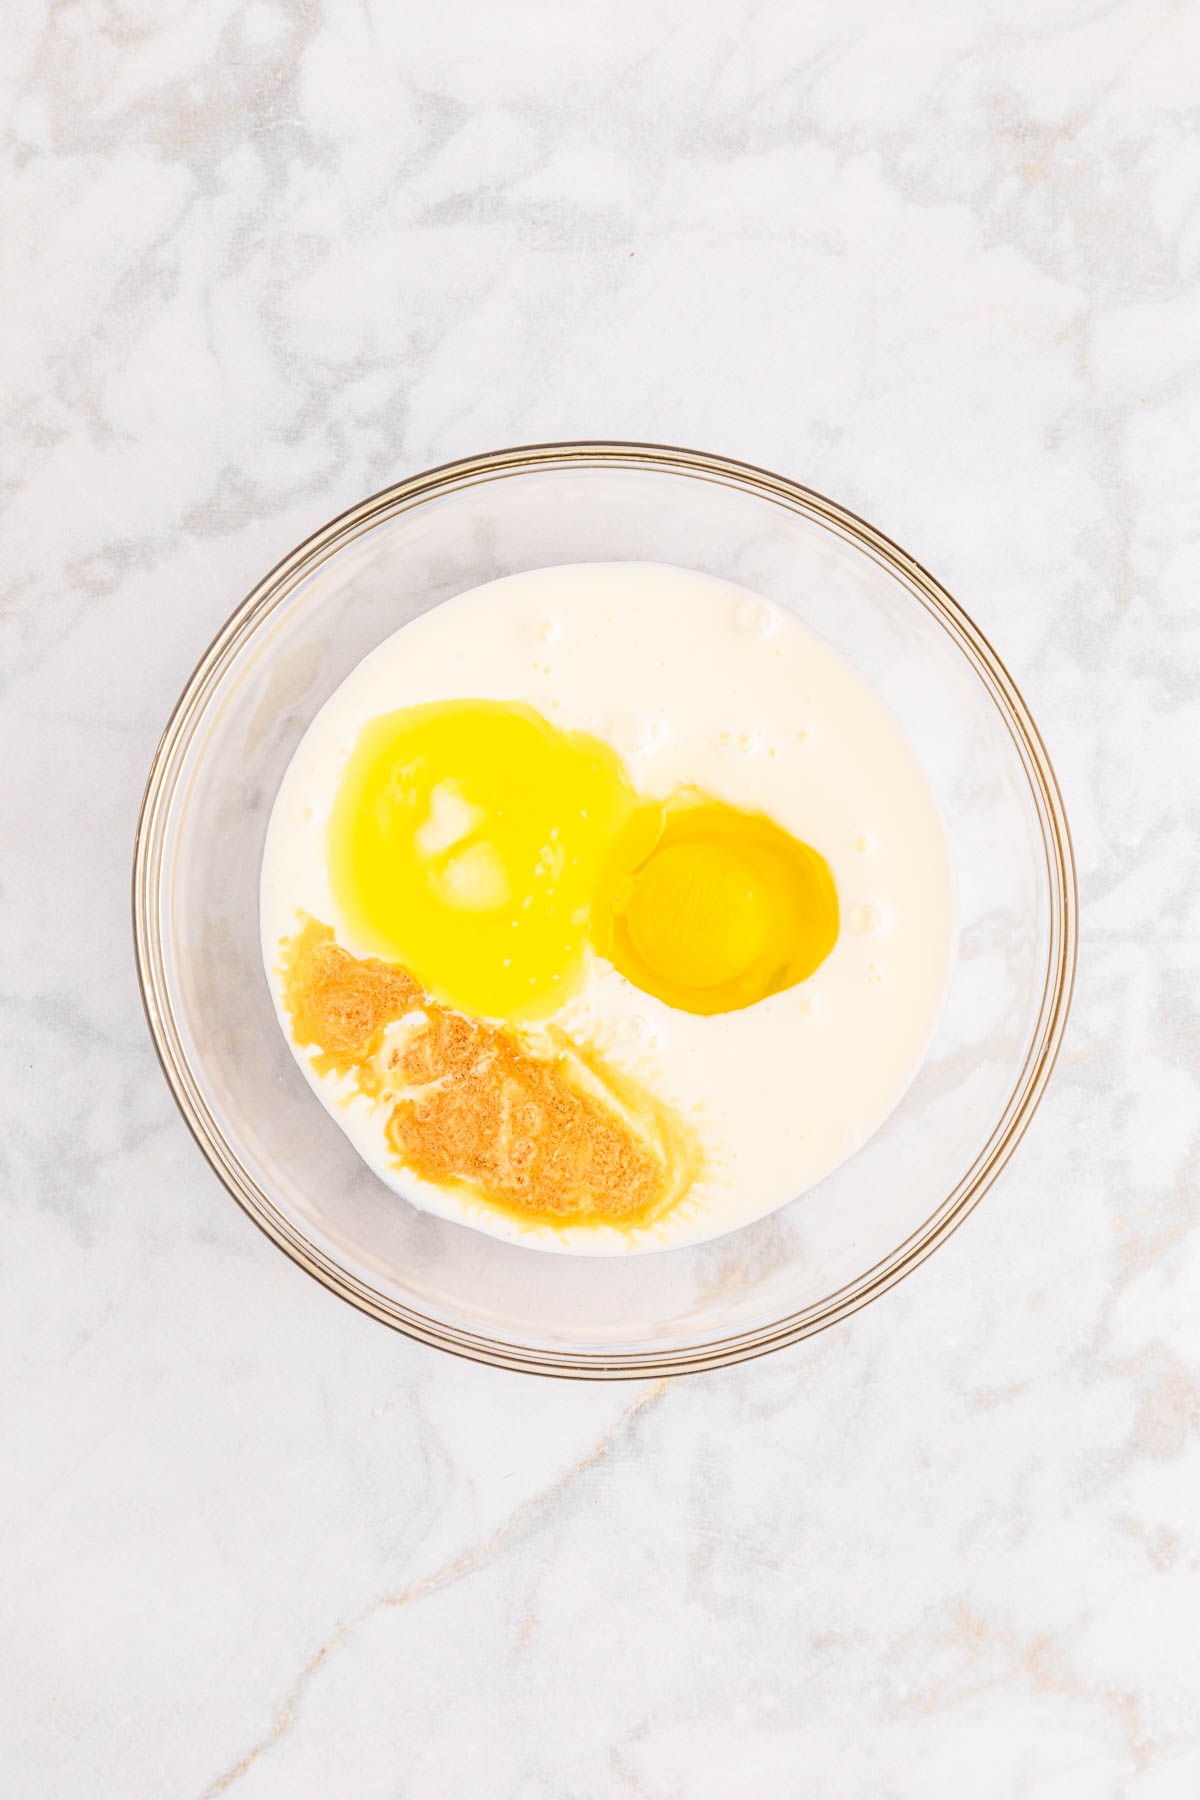 Two eggs, buttermilk and other wet ingredients in a bowl on a marble surface.